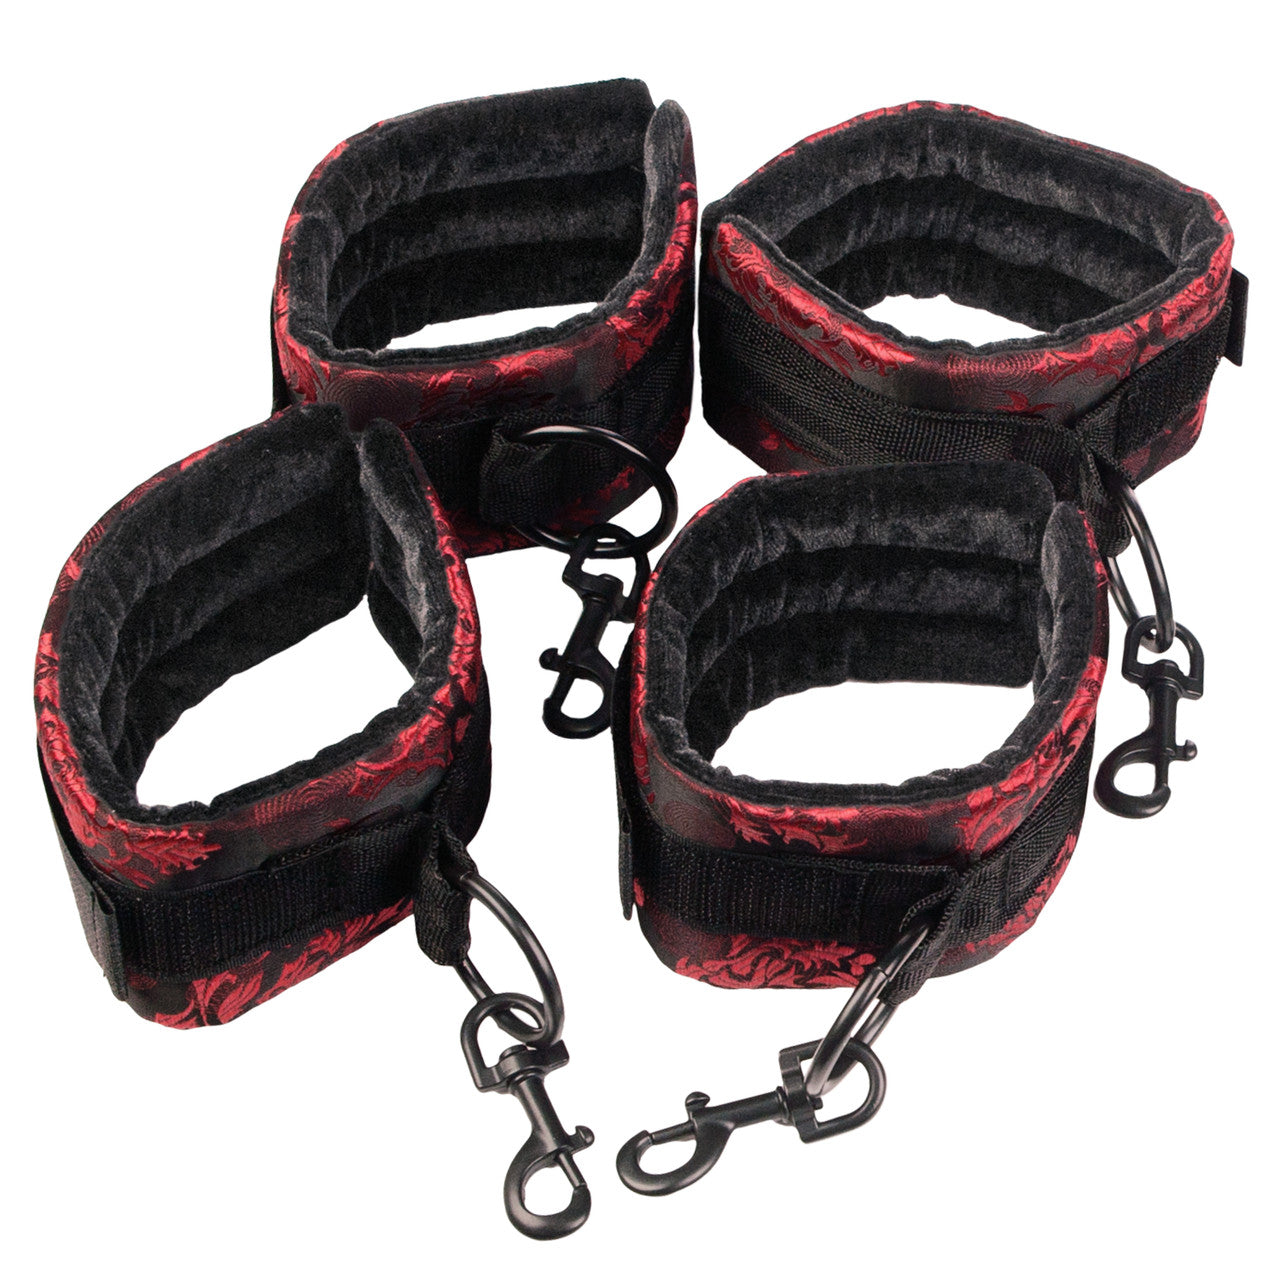 Scandal Bed Restraints - Thorn & Feather Sex Toy Canada